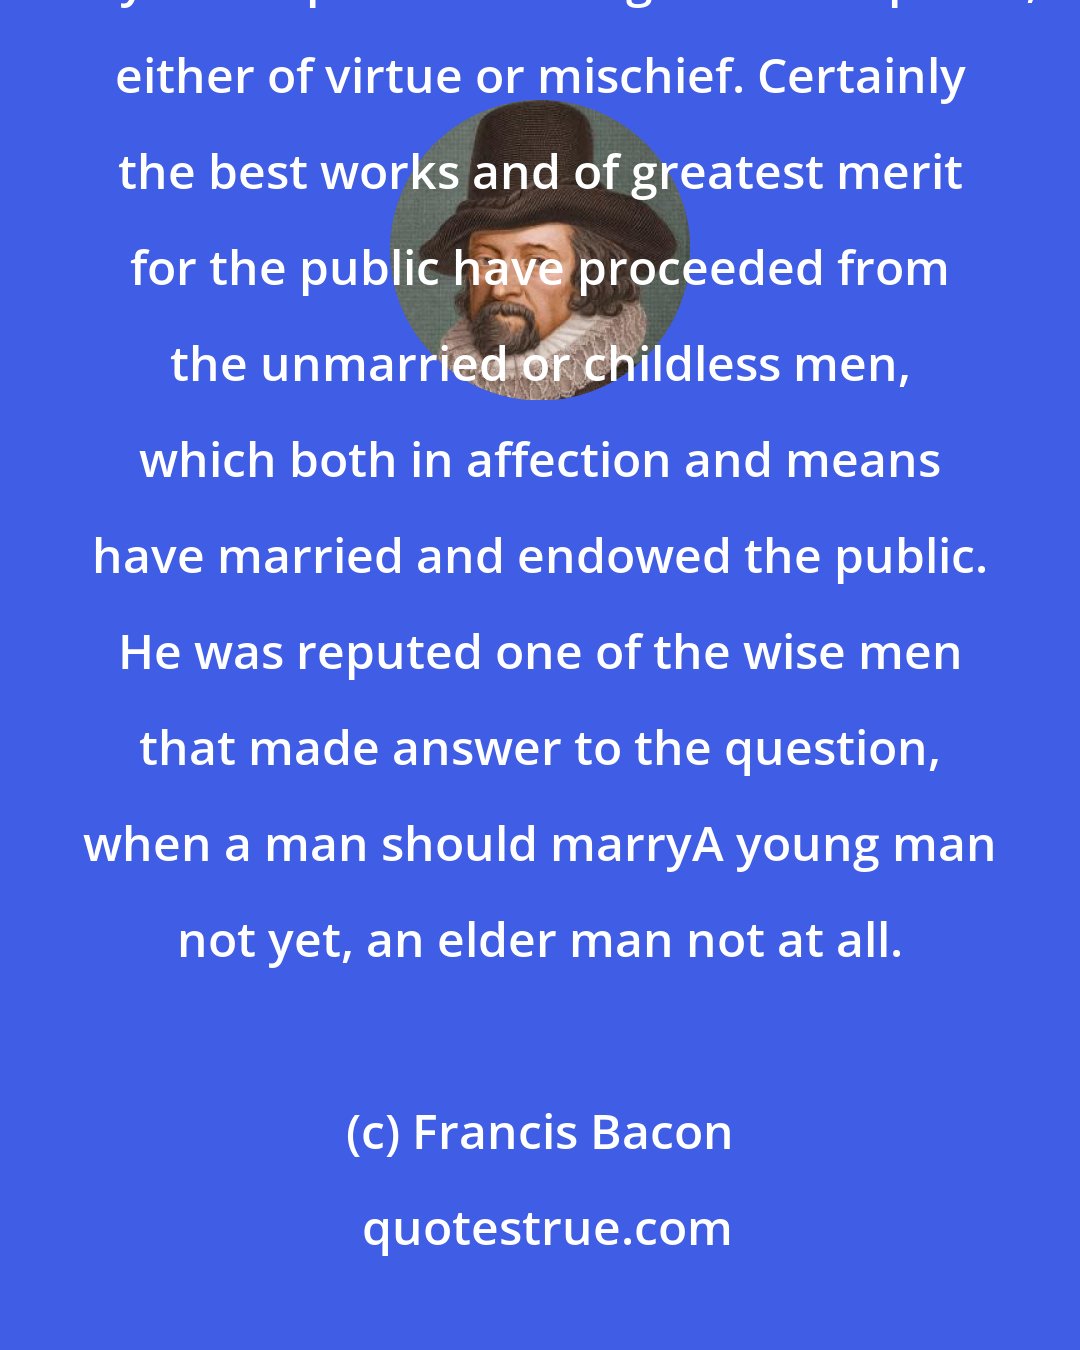 Francis Bacon: He that hath wife and children hath given hostages to fortune, for they are impediments to great enterprises, either of virtue or mischief. Certainly the best works and of greatest merit for the public have proceeded from the unmarried or childless men, which both in affection and means have married and endowed the public. He was reputed one of the wise men that made answer to the question, when a man should marryA young man not yet, an elder man not at all.